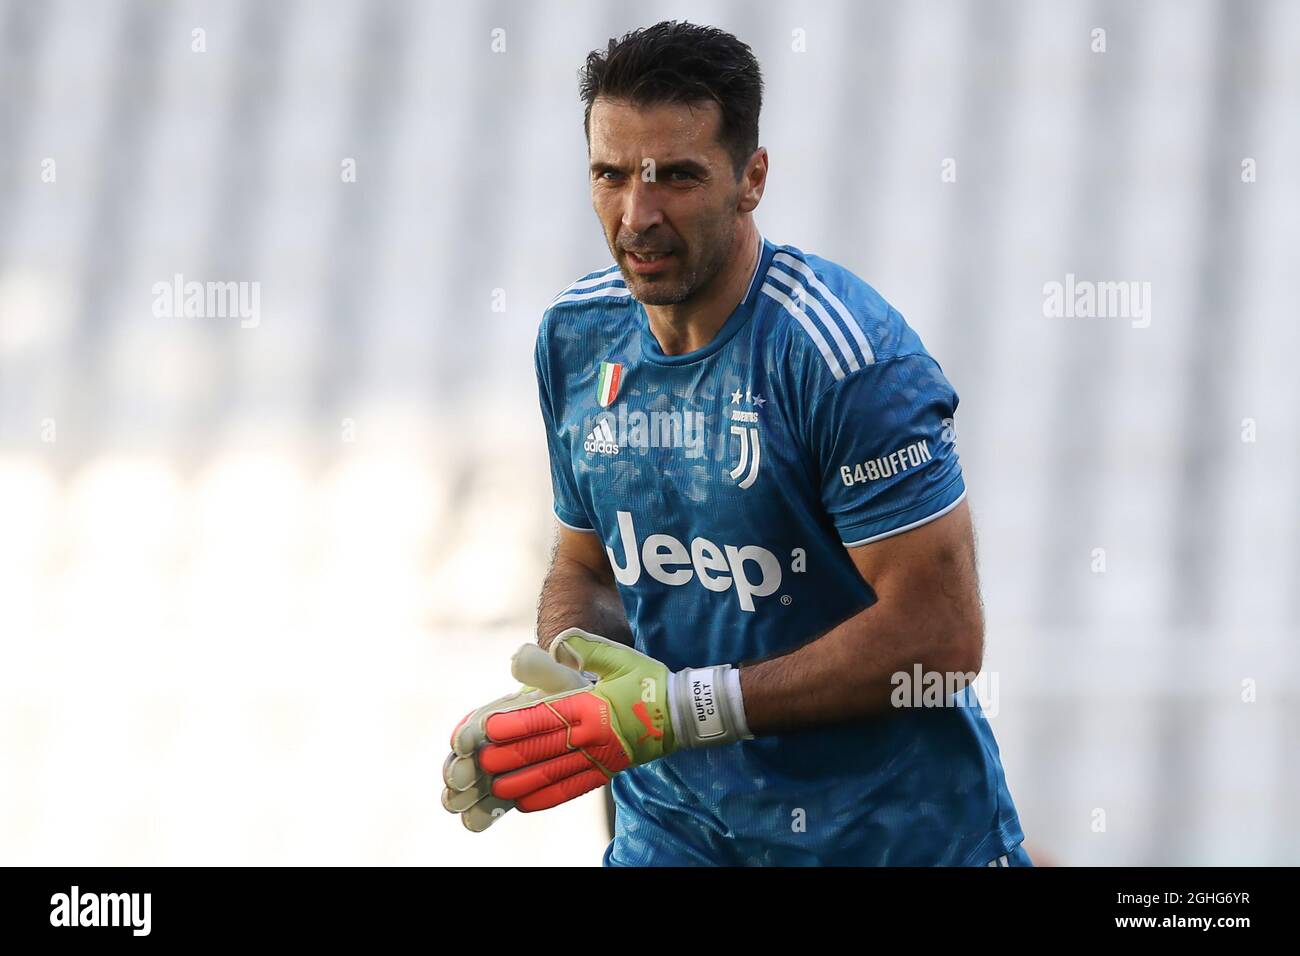 Juventus's Italian goalkeeper Gianluigi Buffon during the Serie A match at Allianz Stadium, Turin. Picture date: 4th July 2020. Picture credit should read: Jonathan Moscrop/Sportimage via PA Images Stock Photo